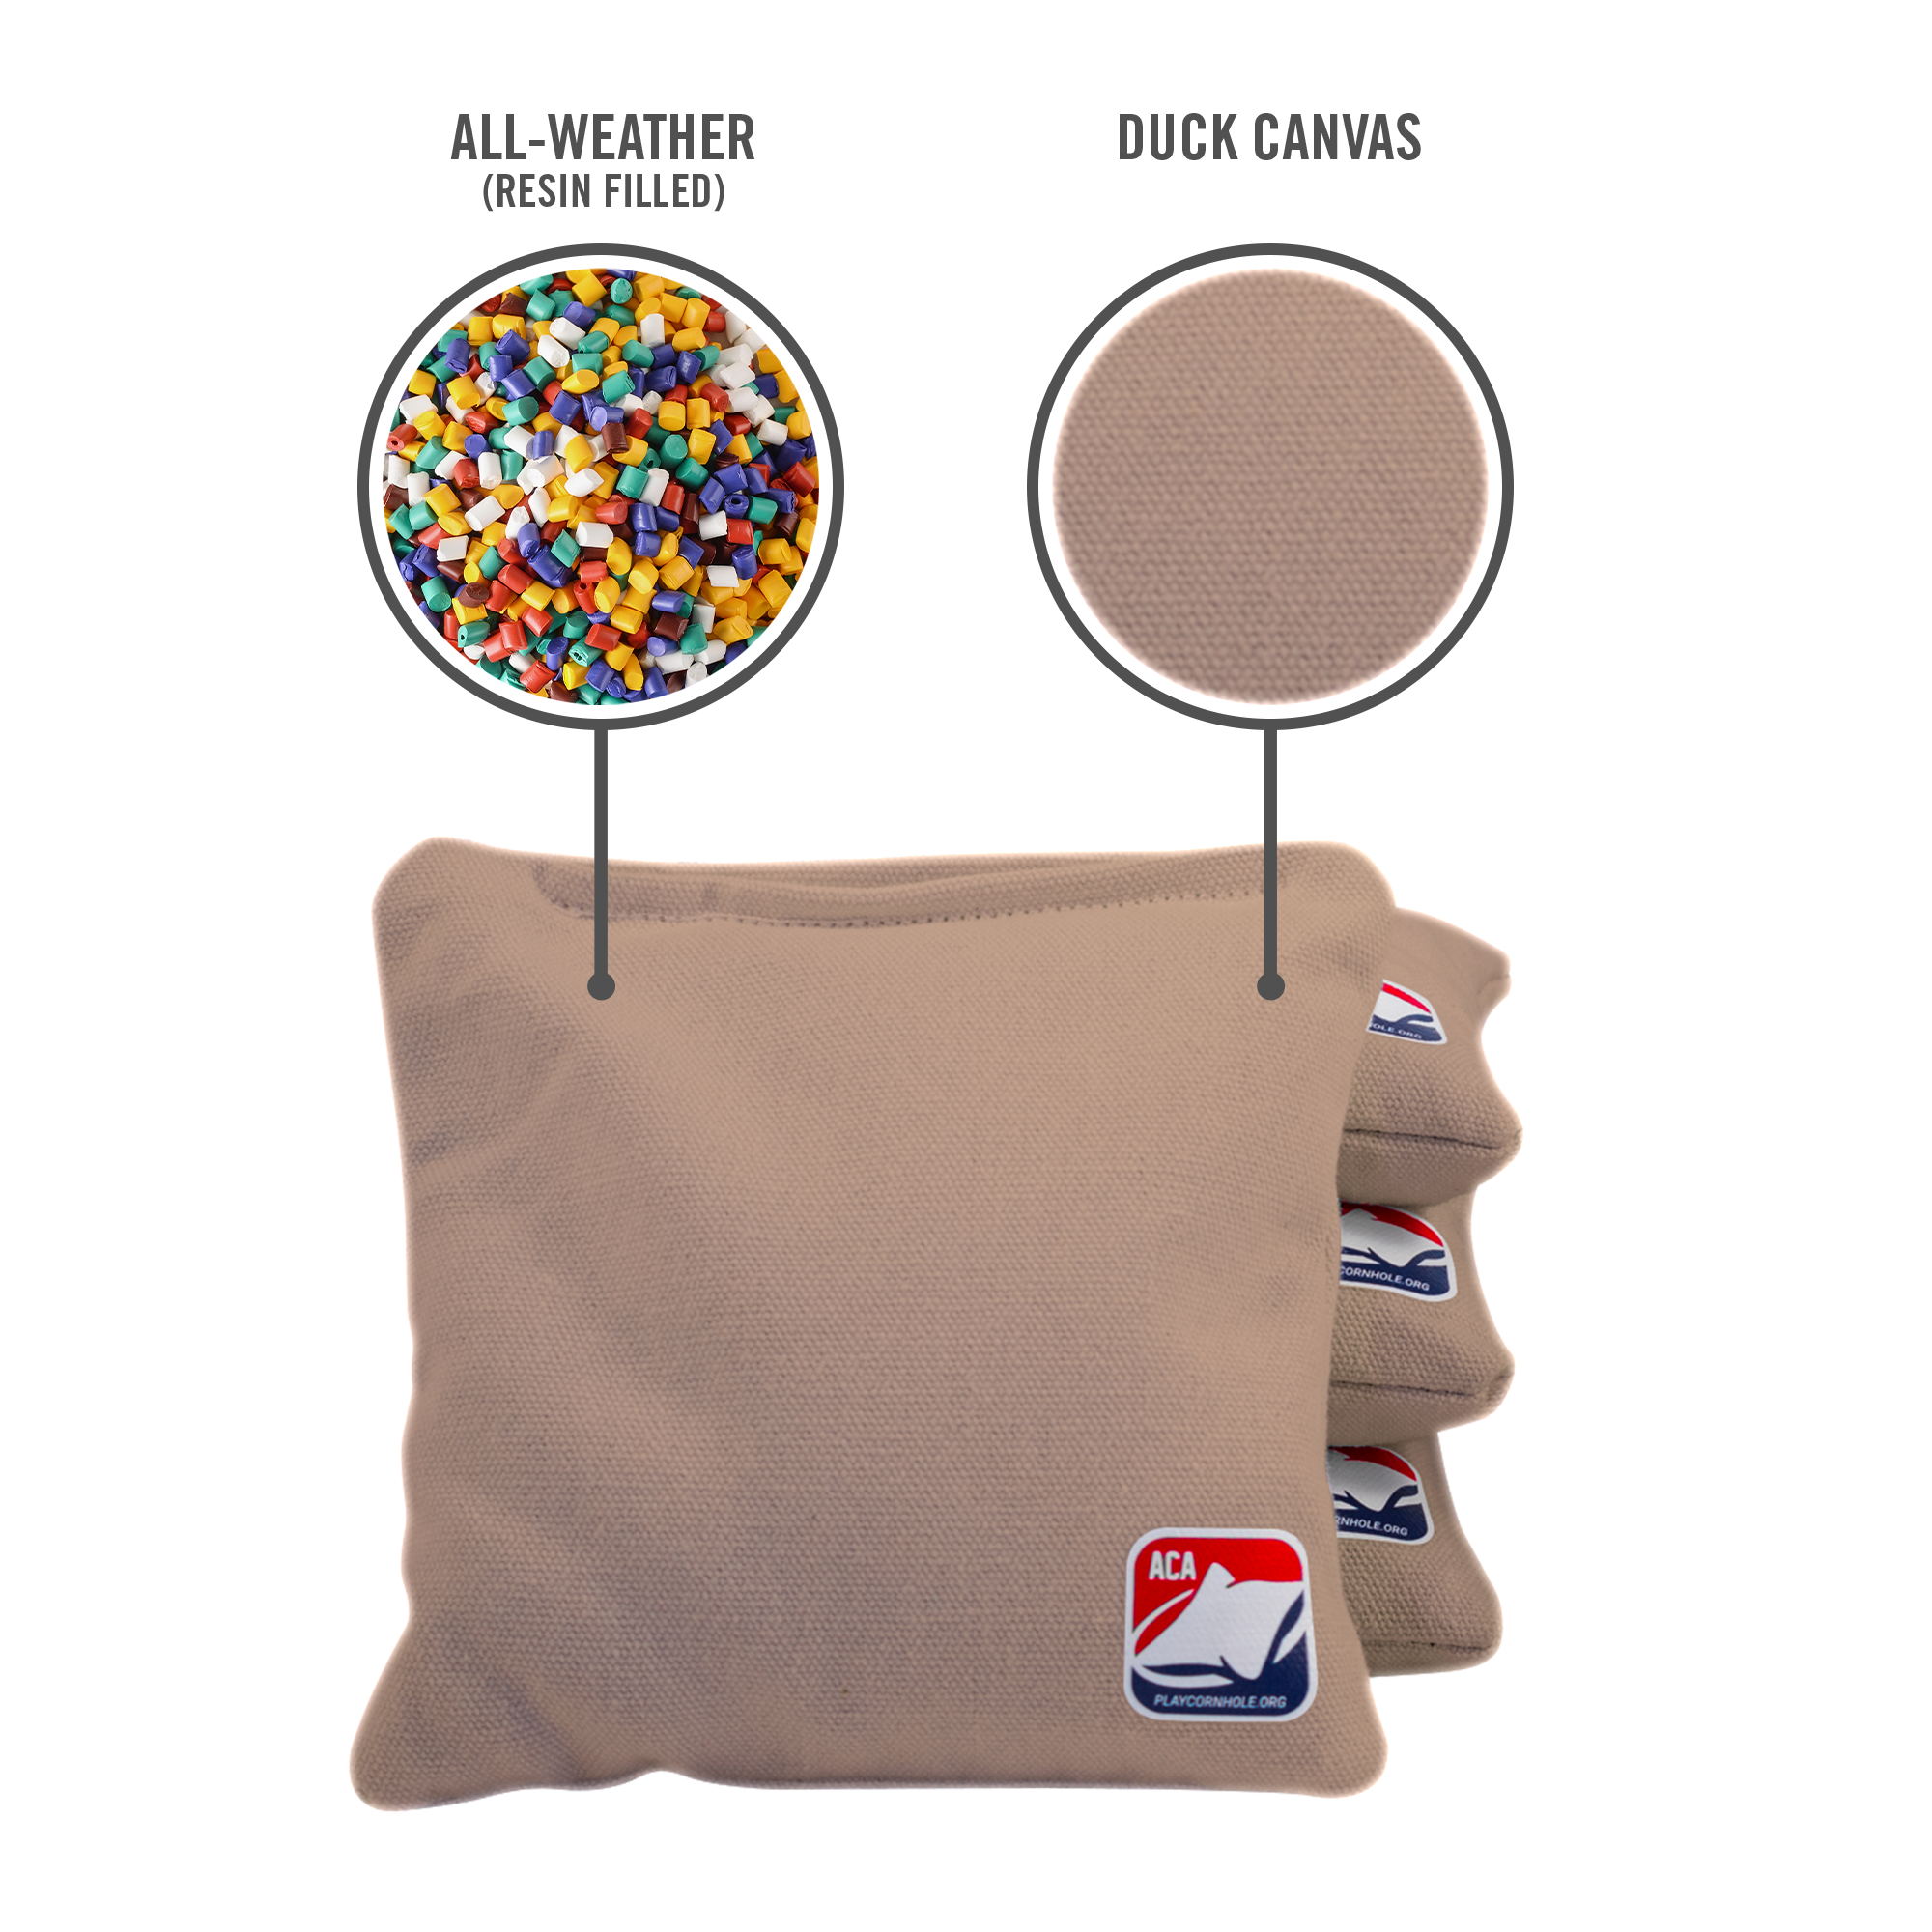 6-in Daily 66x Khaki Competition Regulation Cornhole Bags